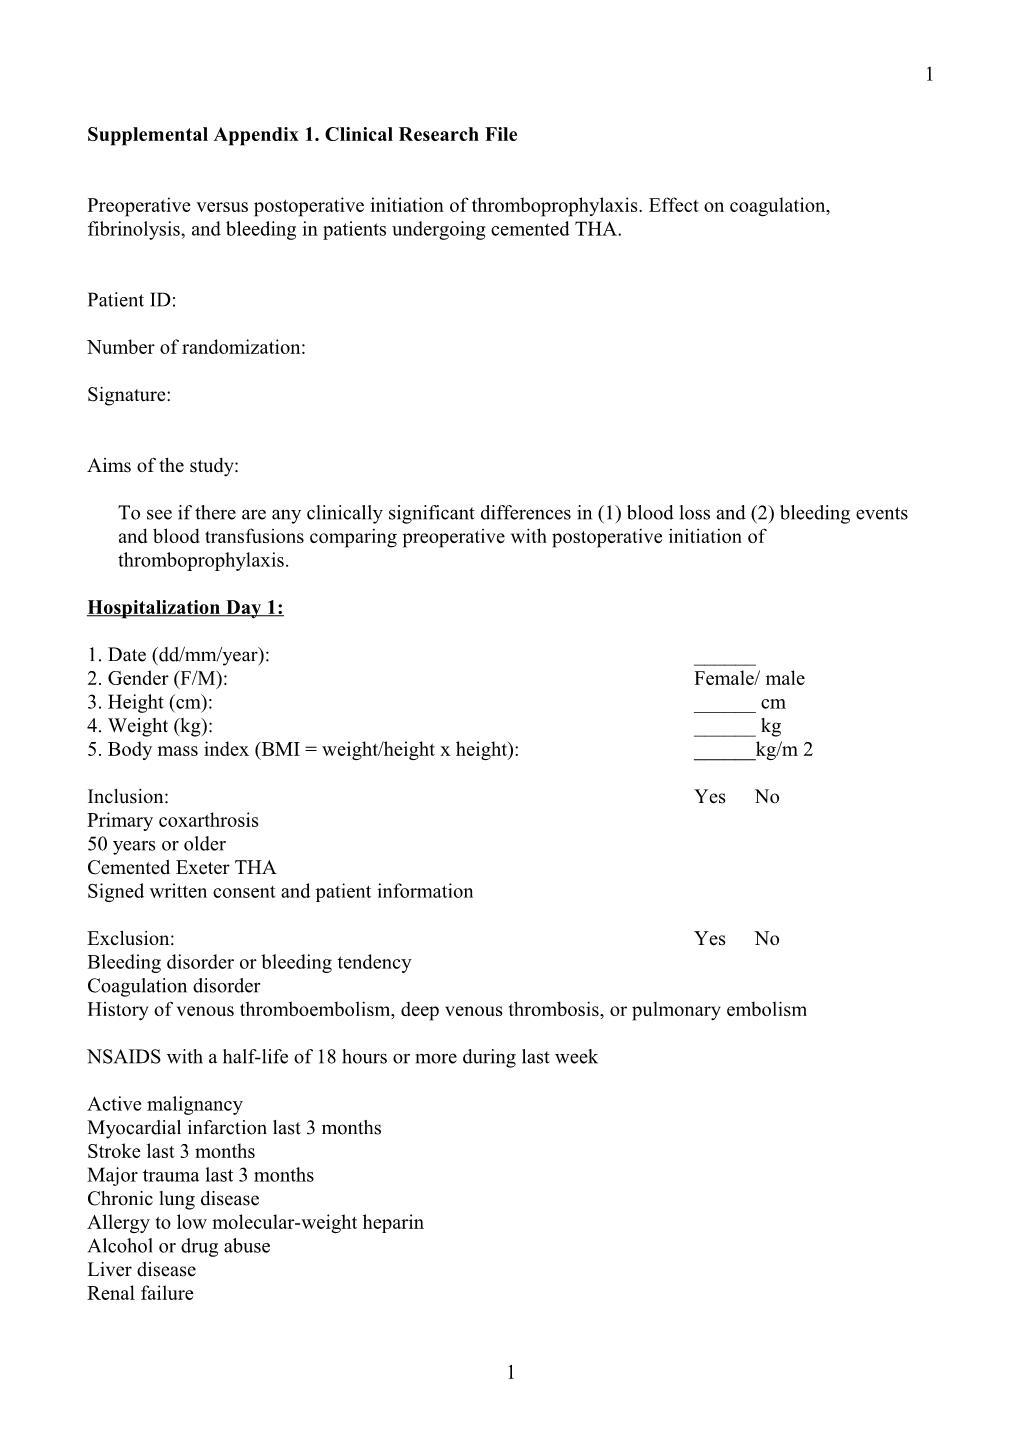 Supplemental Appendix 1. Clinical Research File